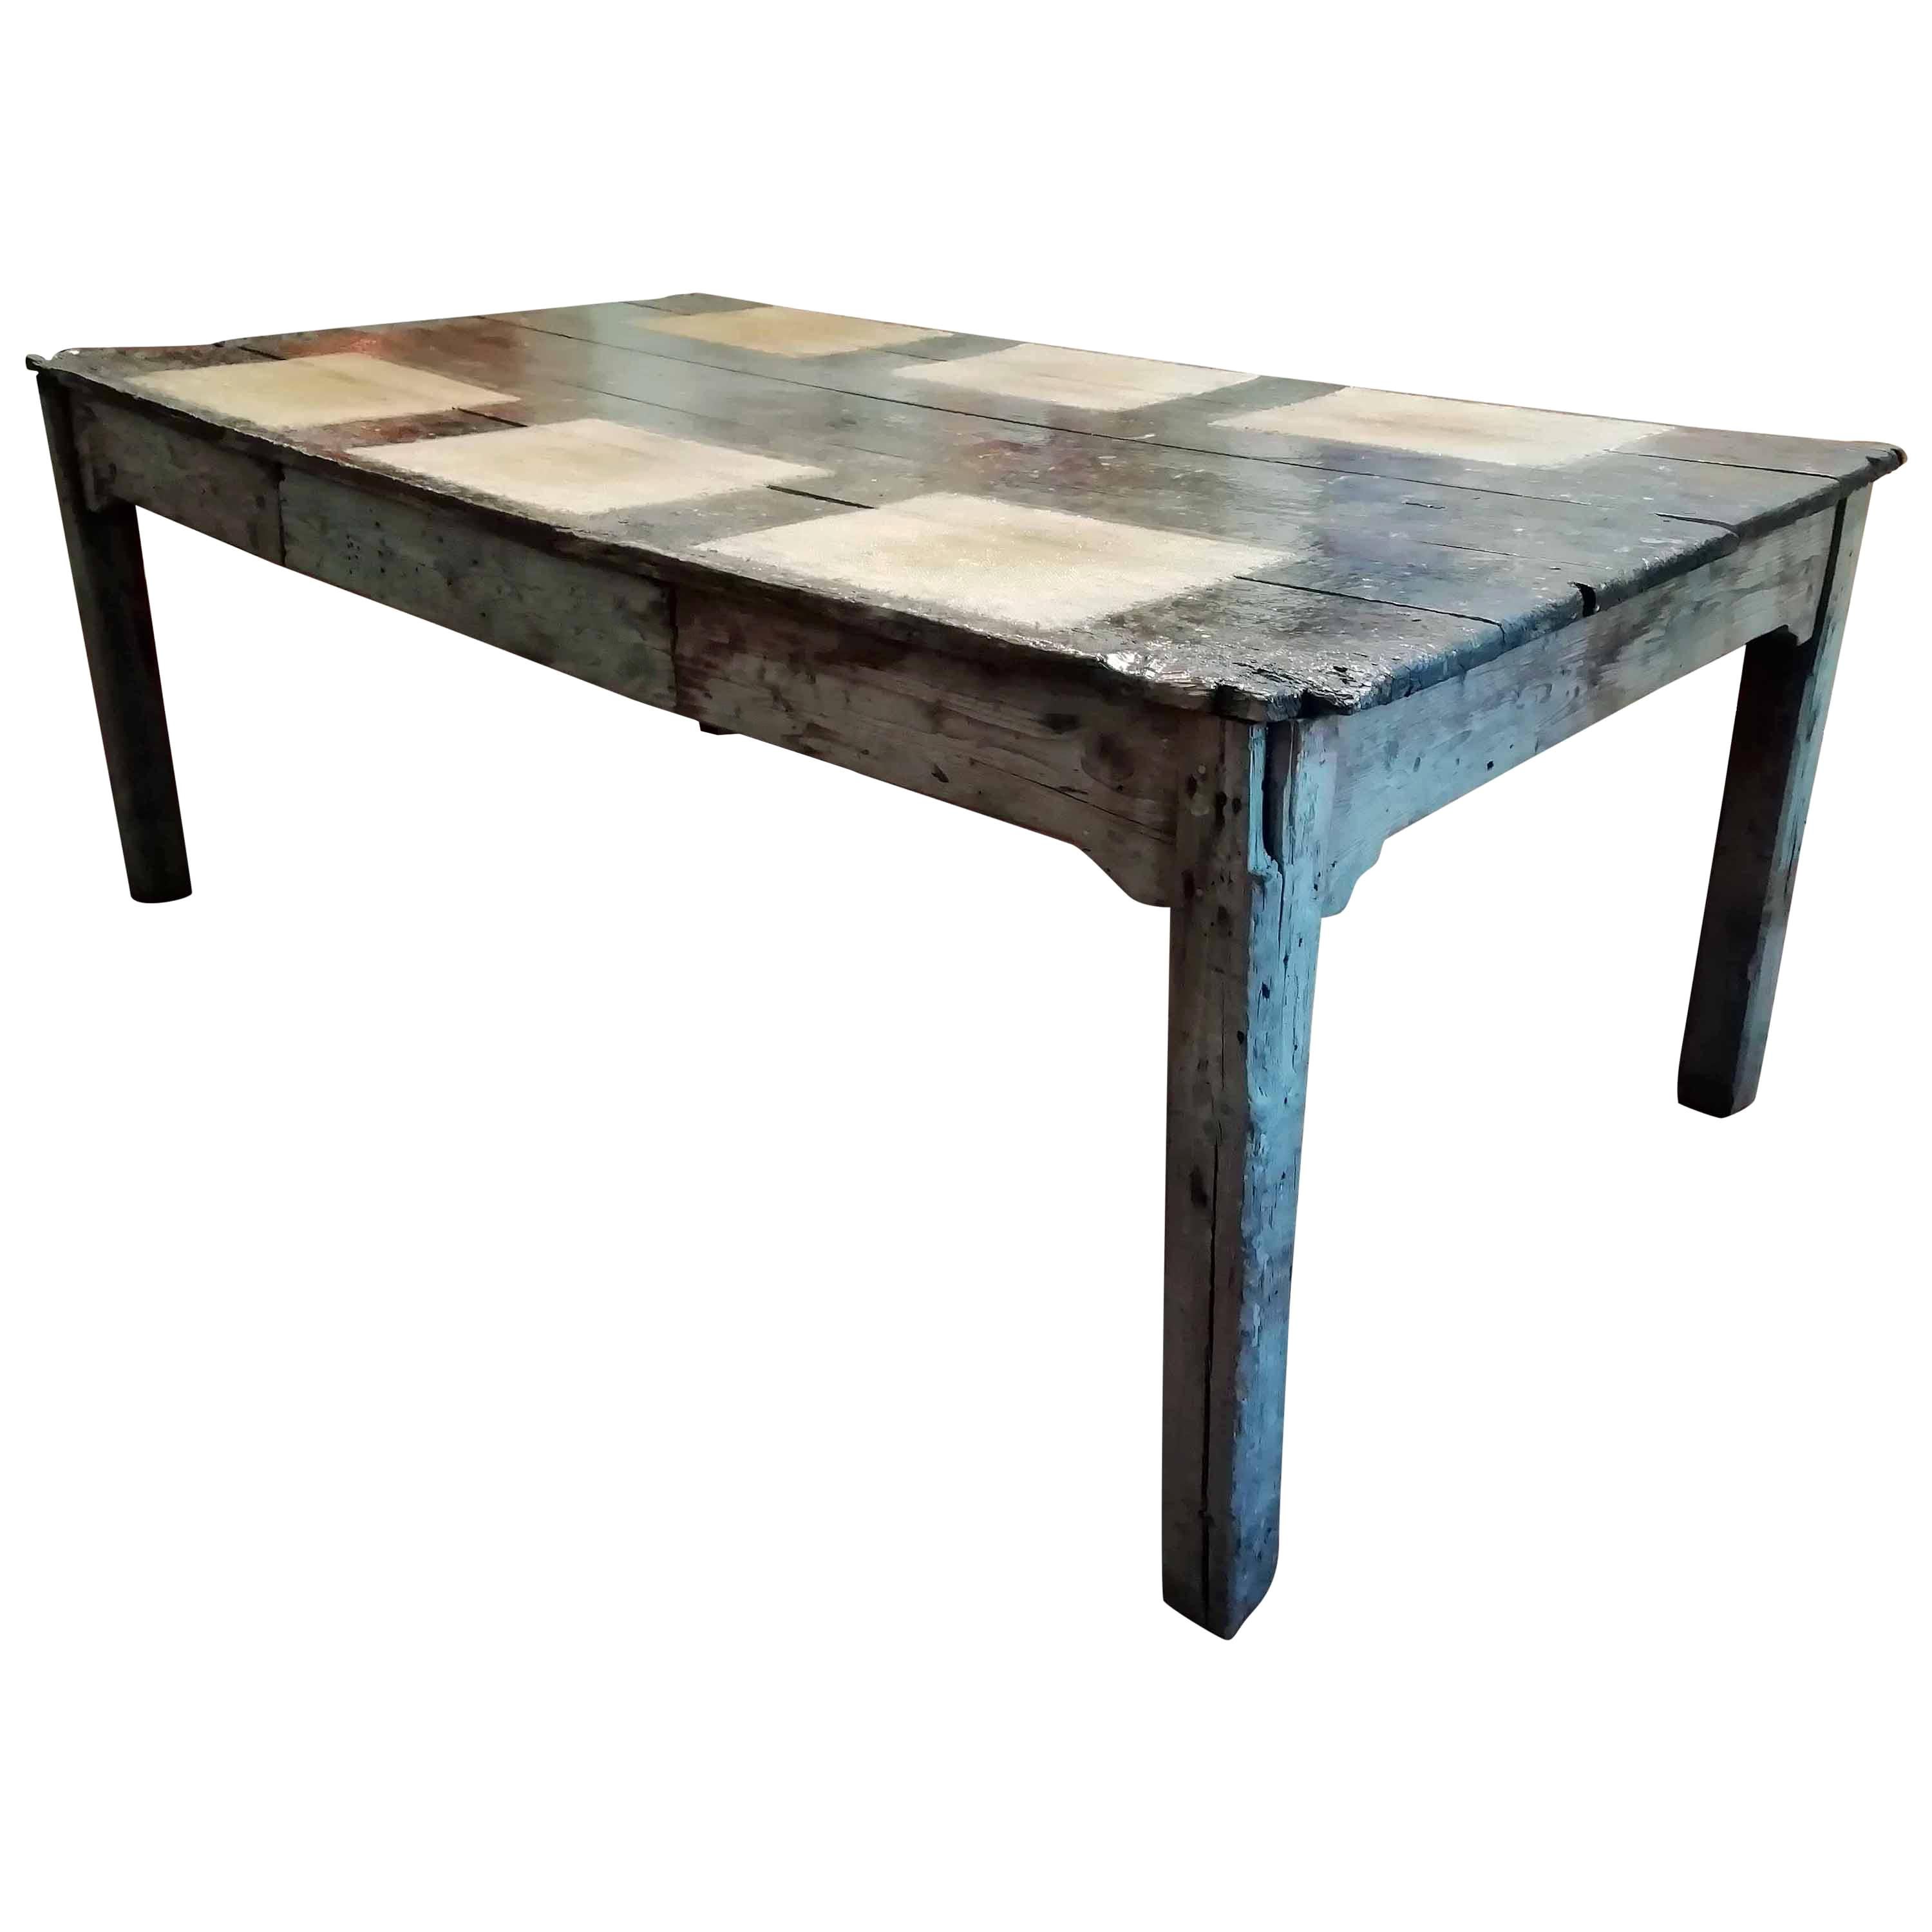 Midcentury Italian Brutalist Spruce Table with Decorated Top from 1960s For Sale